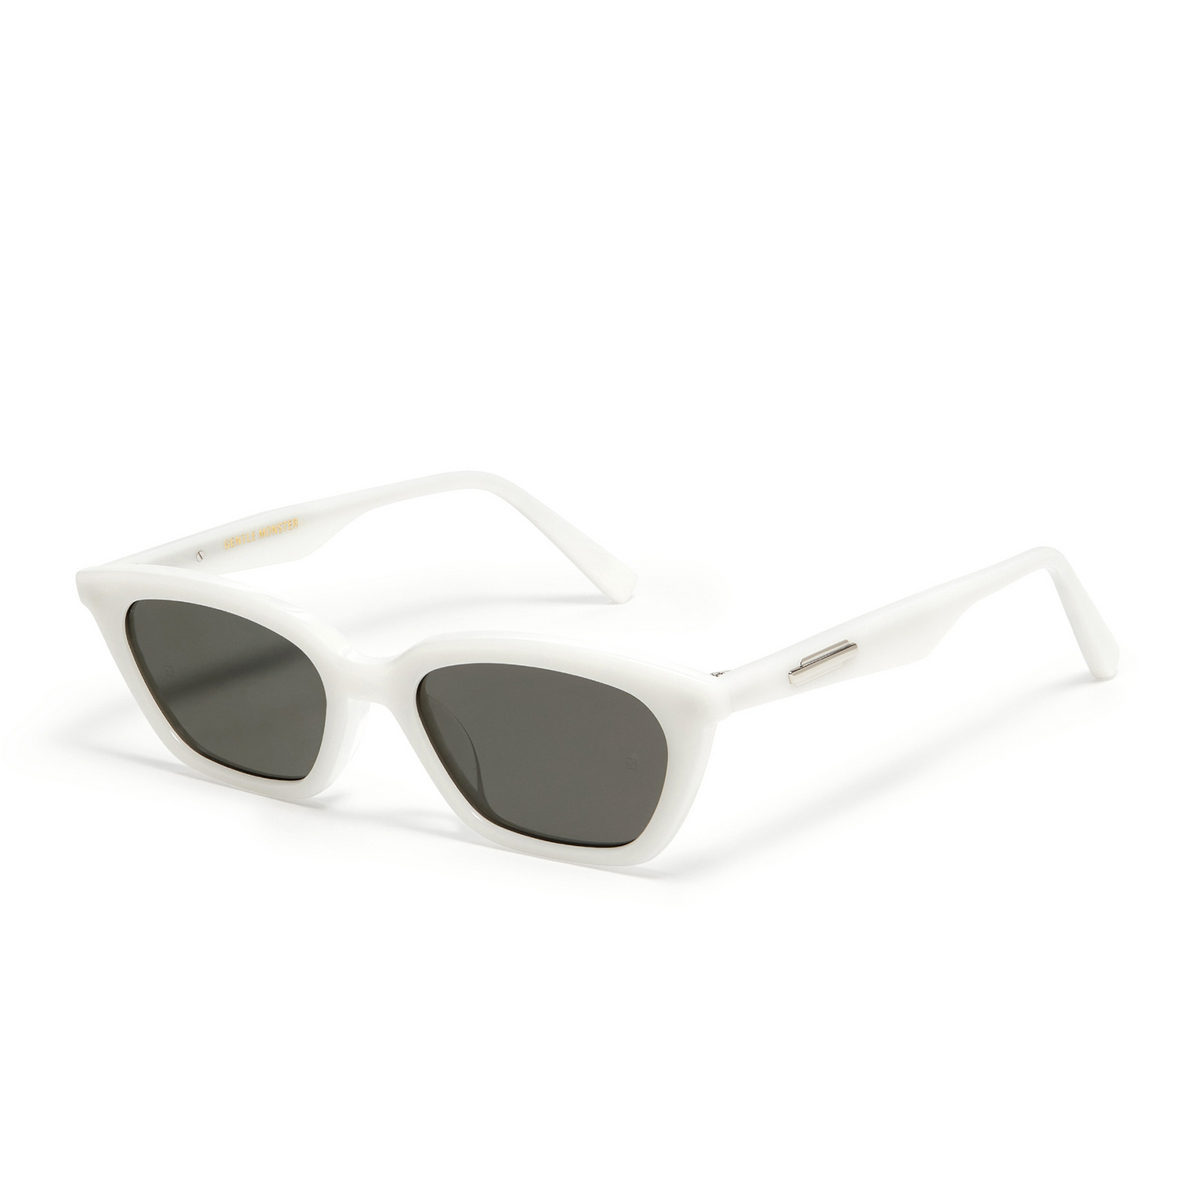 Gentle Monster® Cat-eye Sunglasses: Loti color White W2 - three-quarters view.